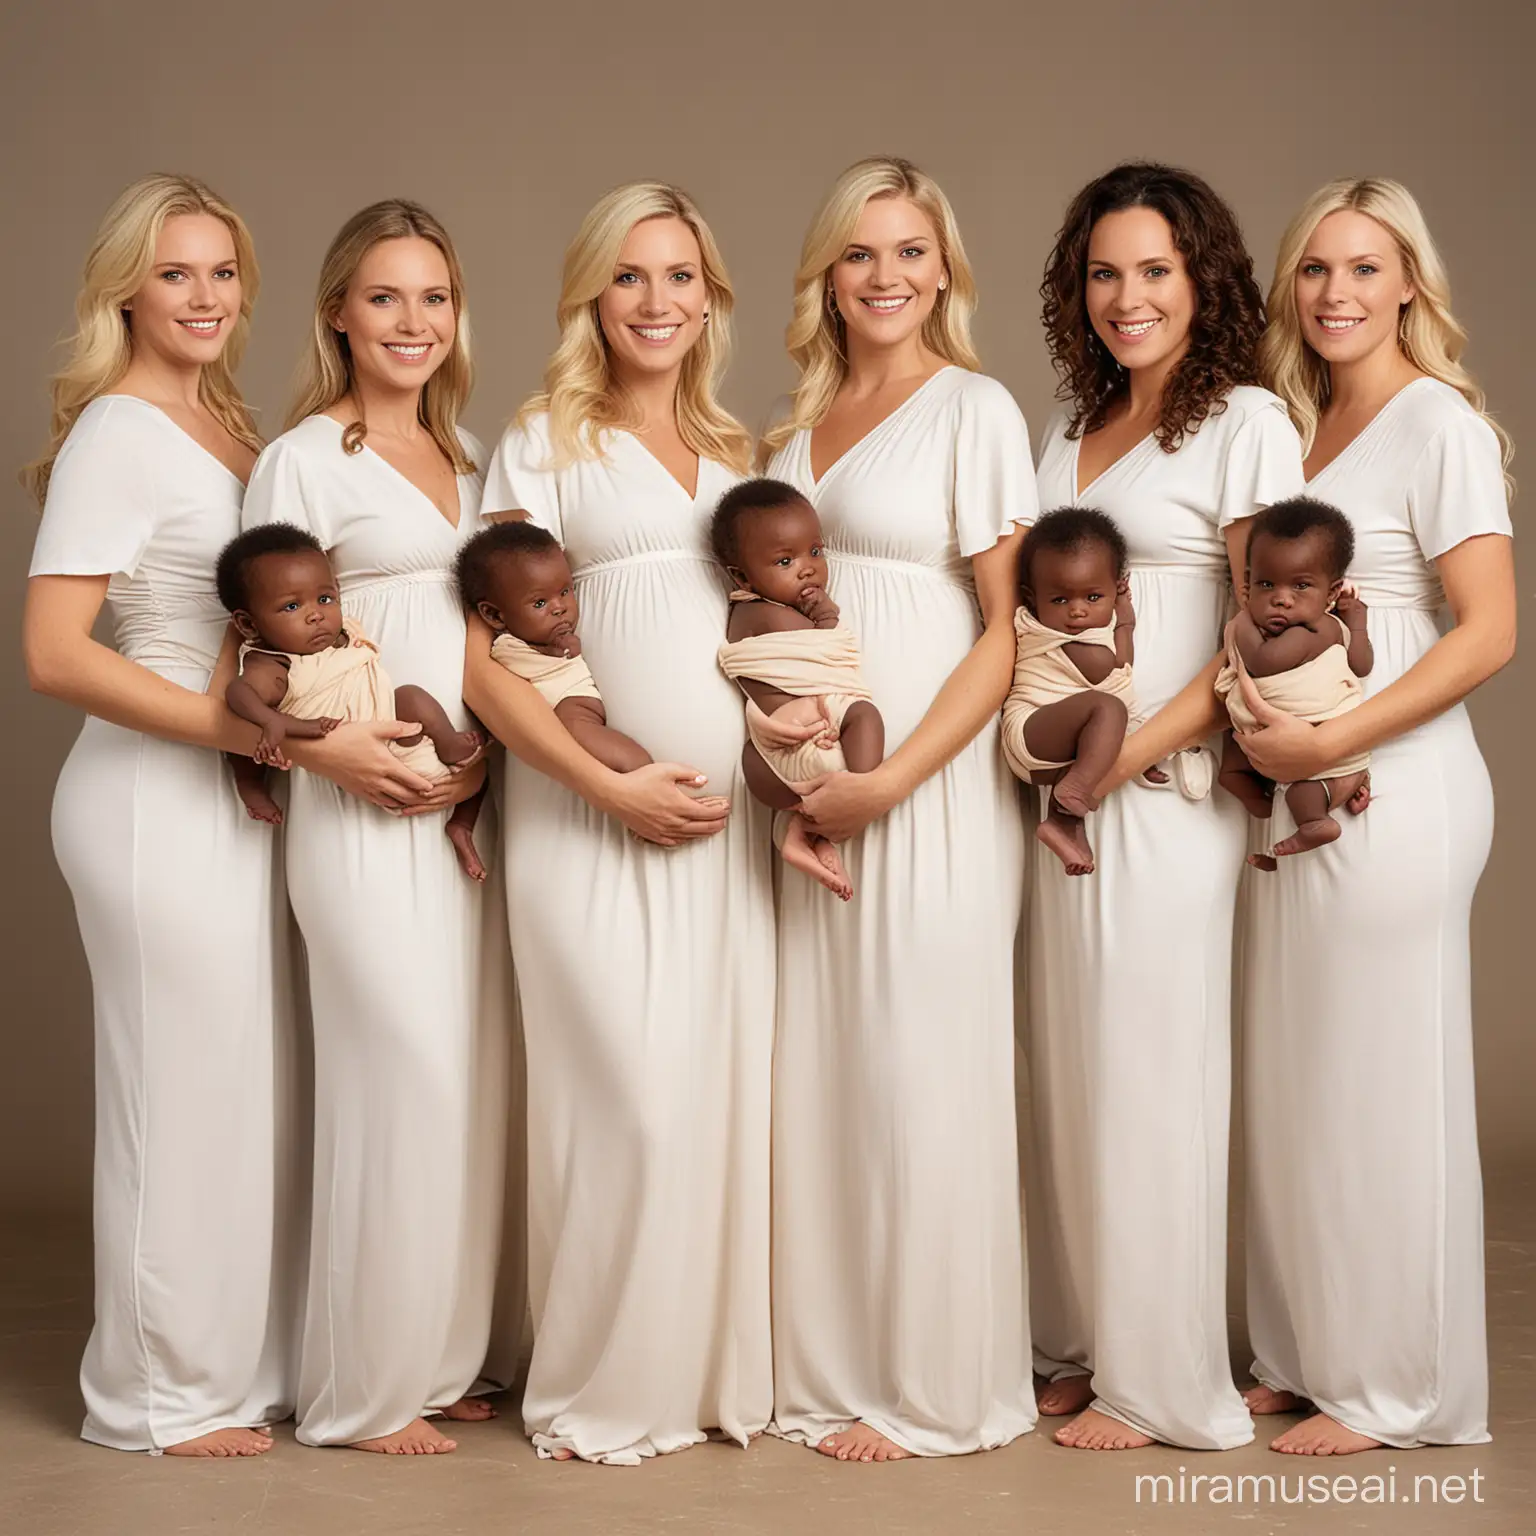 Multicultural Maternity Ten Pregnant Women Embracing Diversity in a Family Portrait